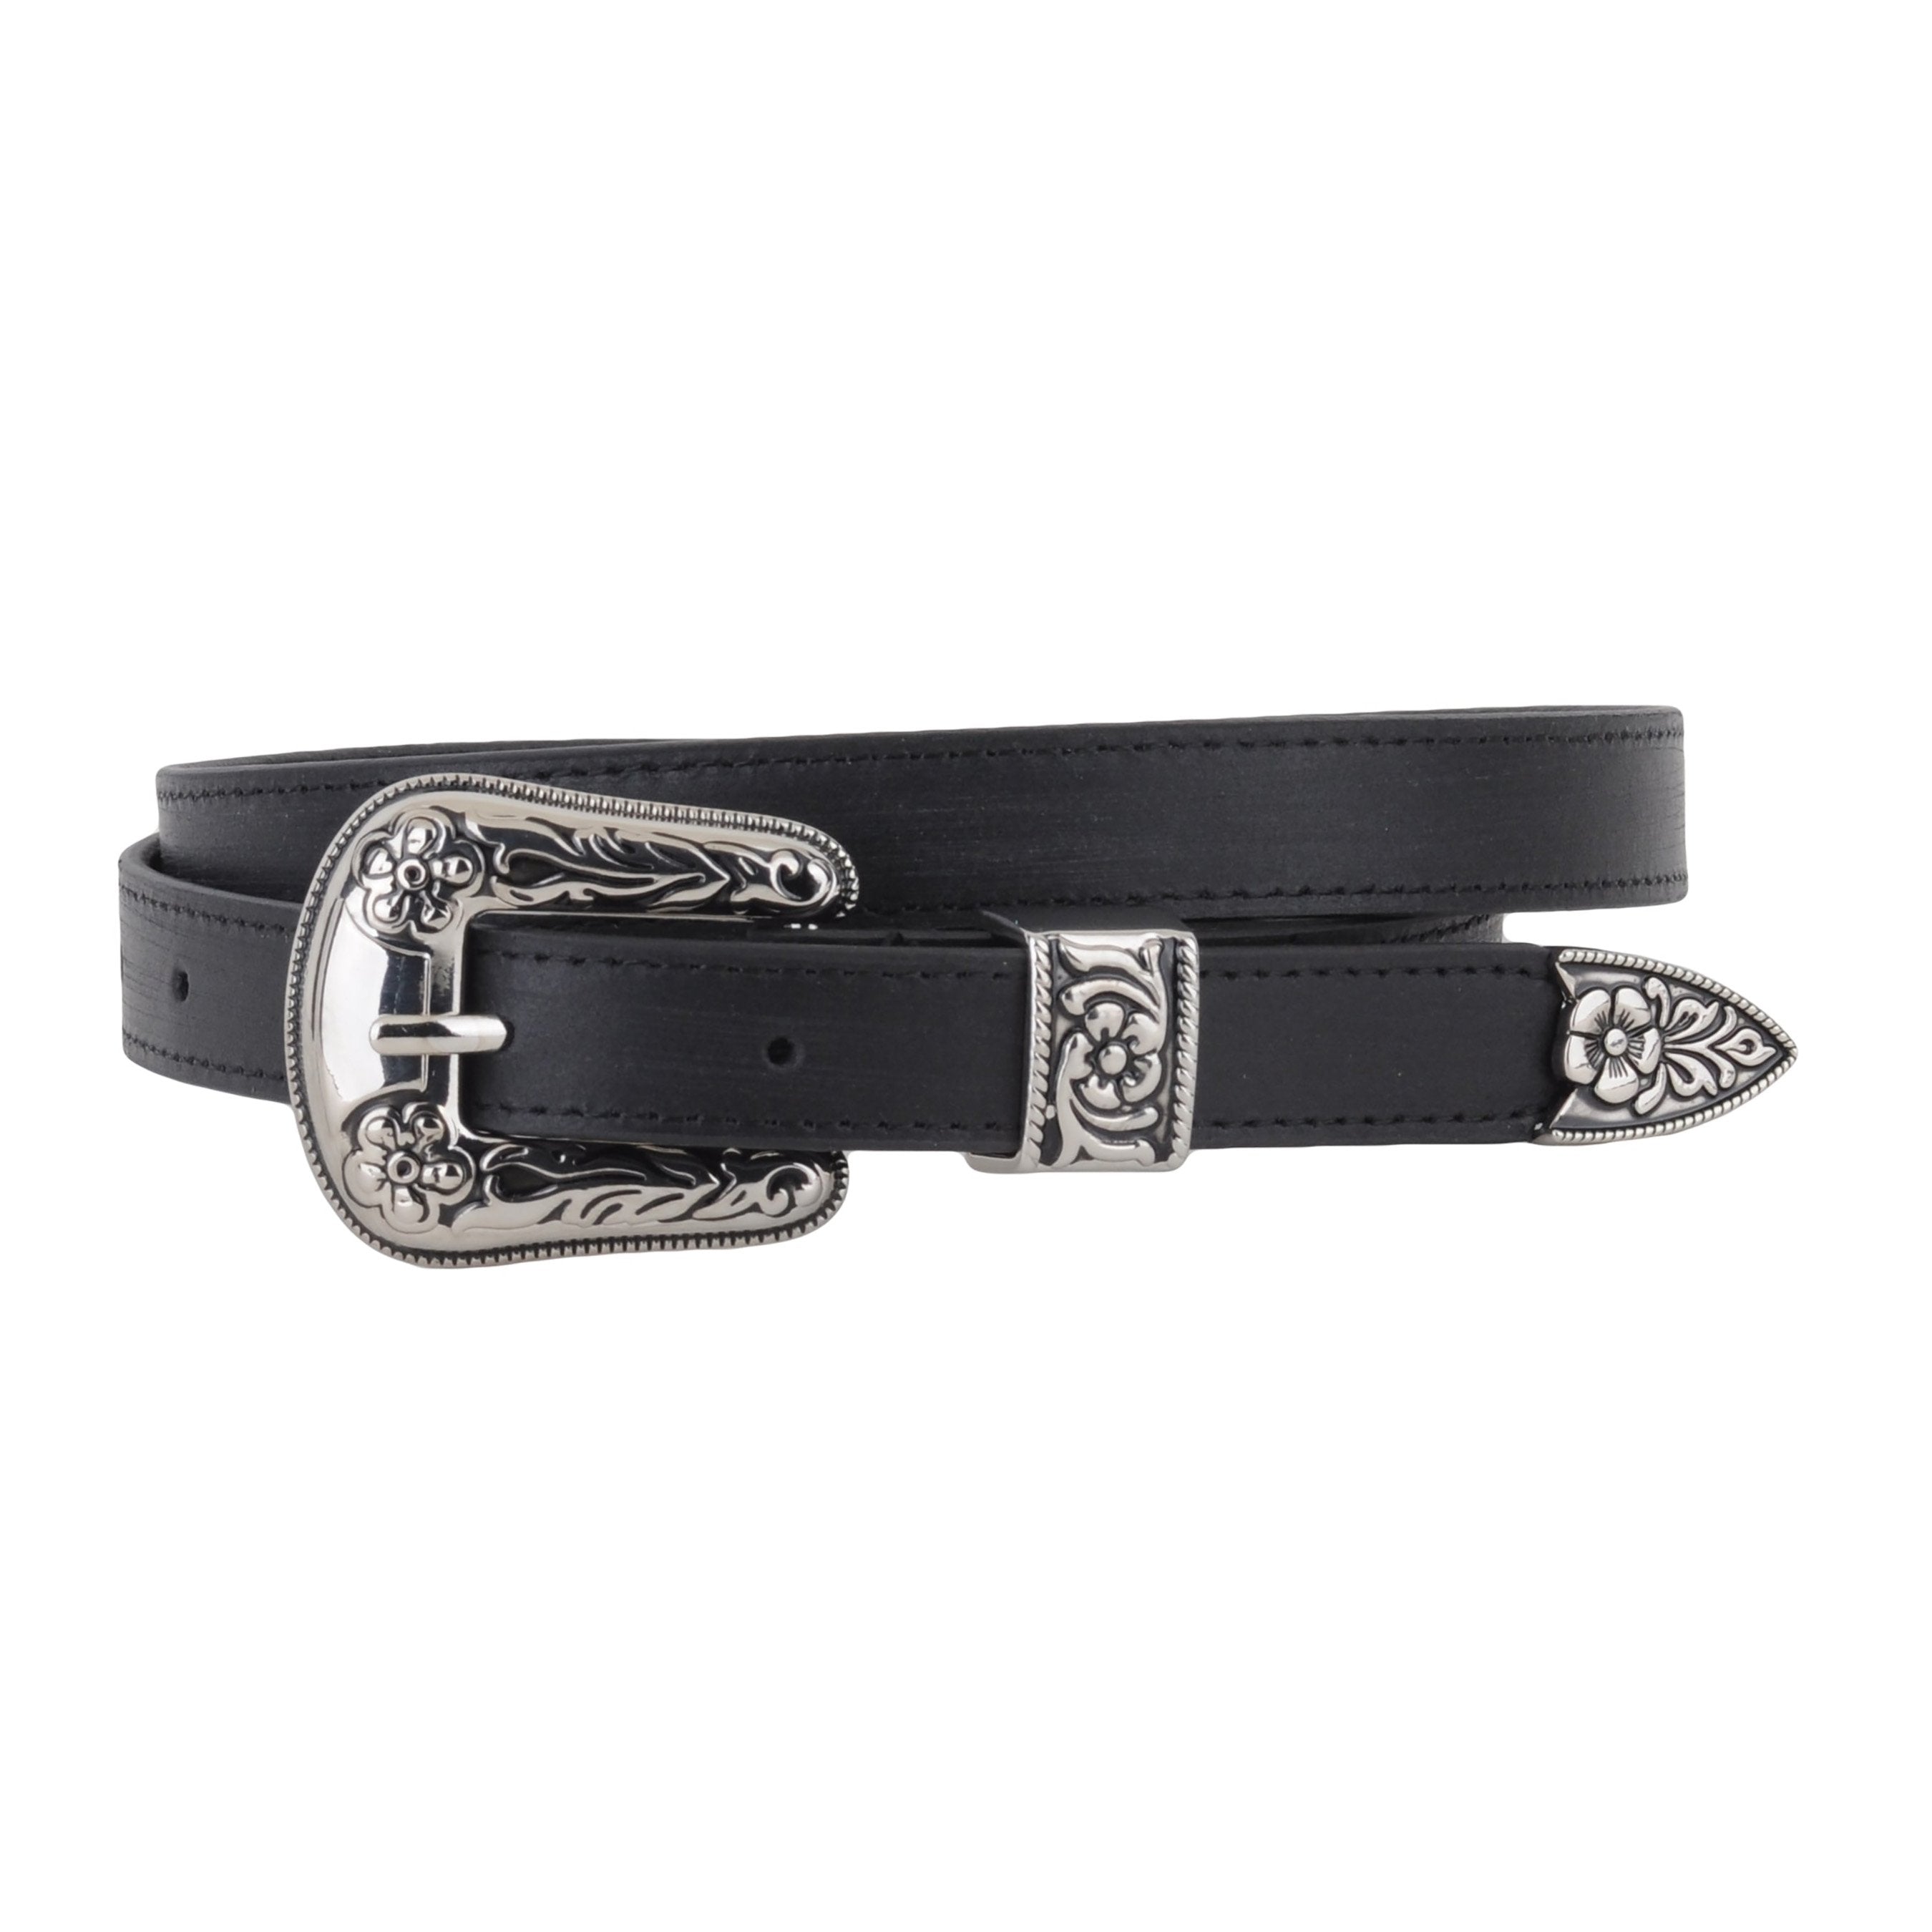 XZQTIVE Women Men Western Belt Vintage Country Belts for Cowgirl Cowboys Genuine Leather Belt with Silver Diamond Buckle